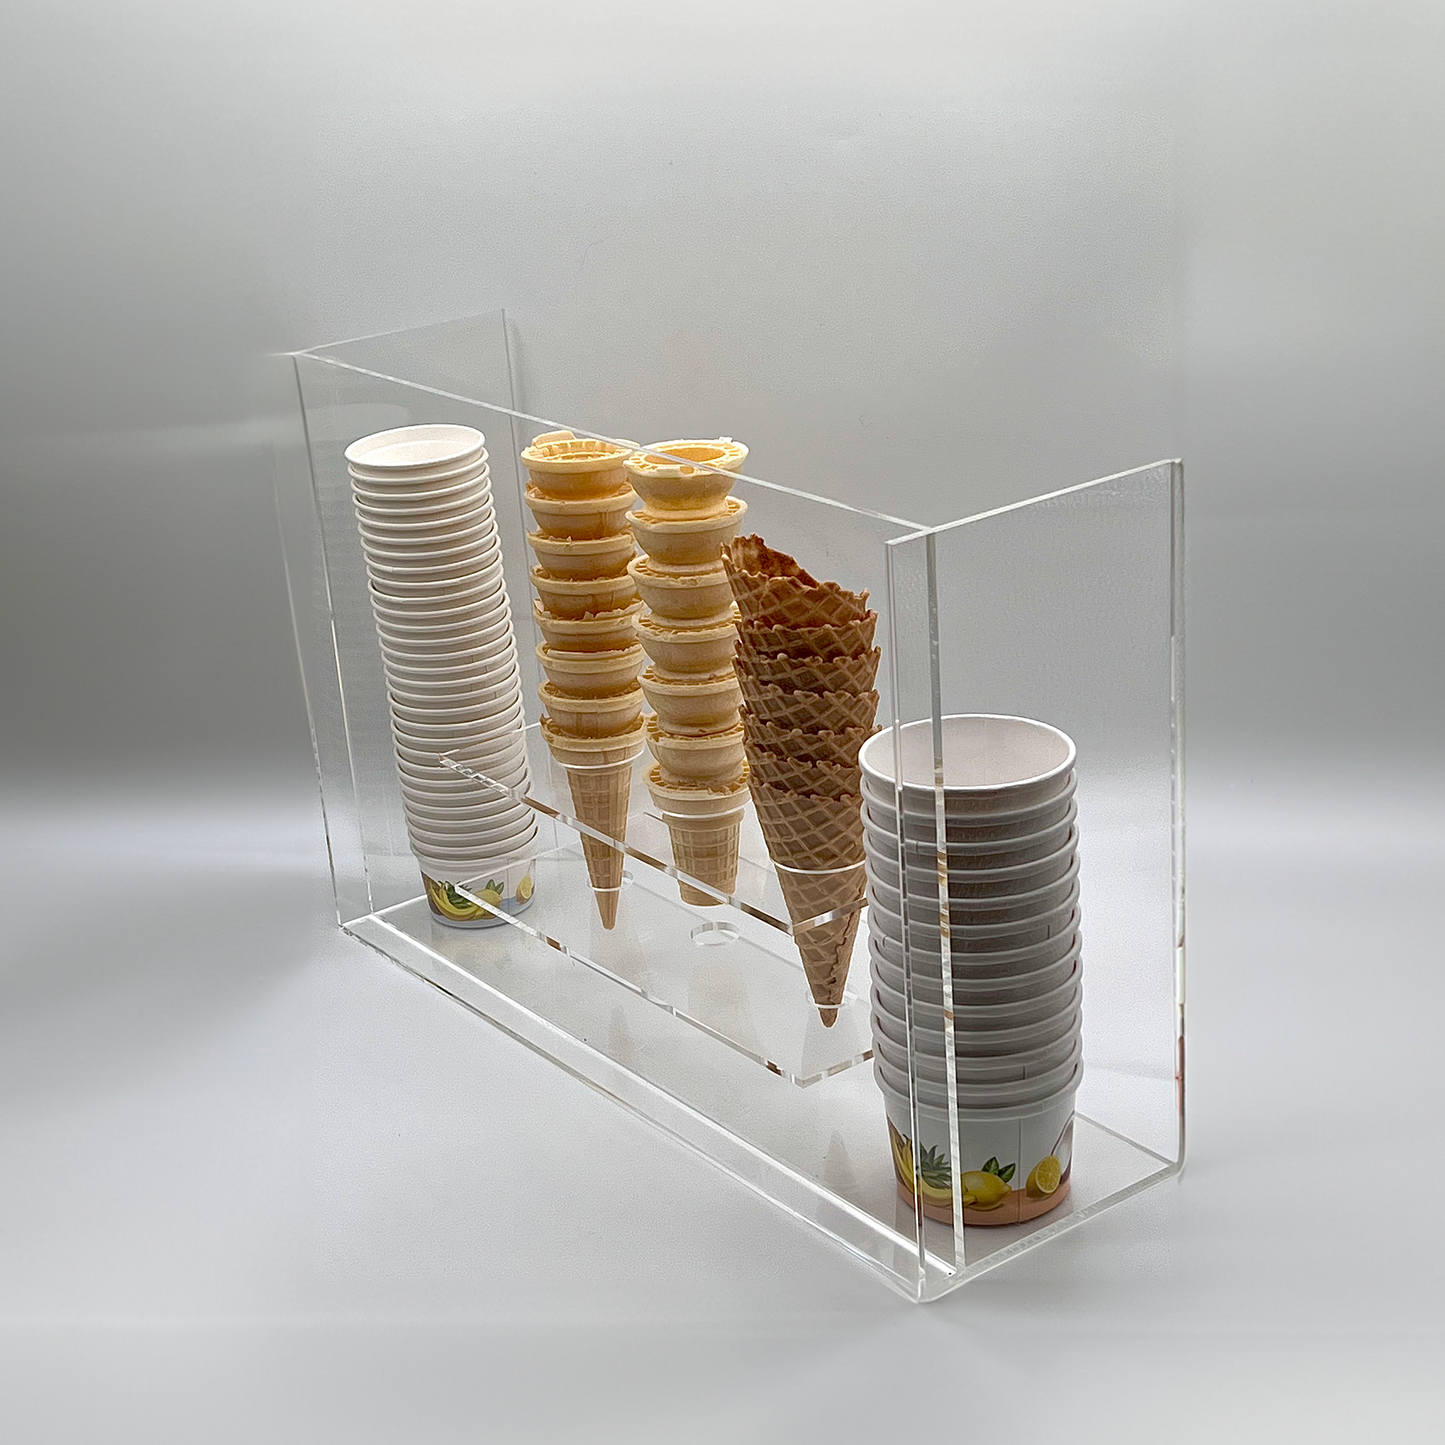 Premium Acrylic Cone/Cup/Dessert display with sneeze guard